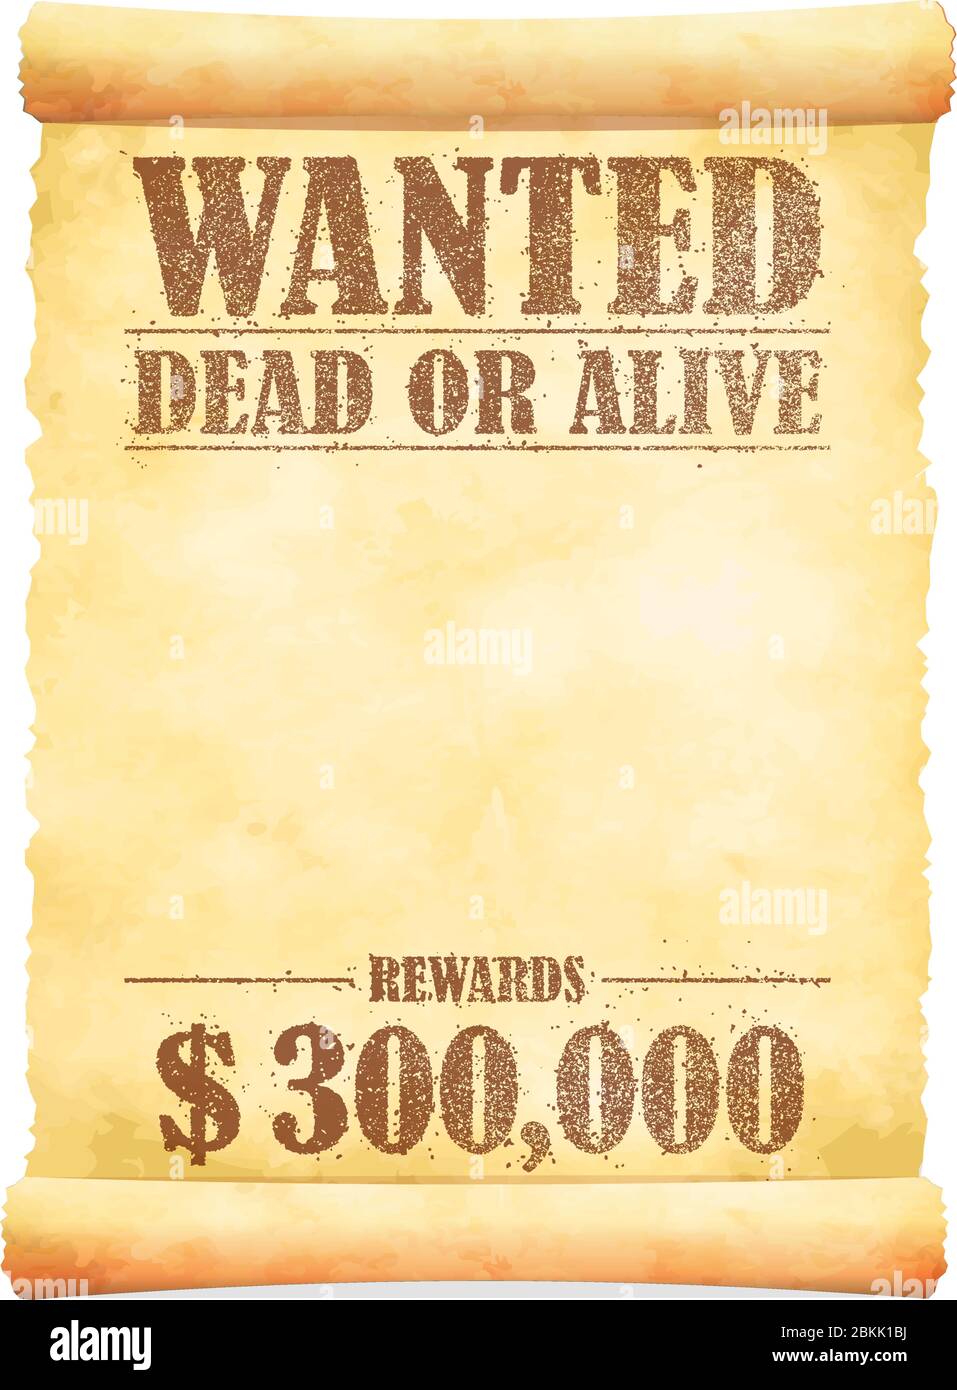 Grunged wanted paper template vector illustration / American Old West. Stock Vector